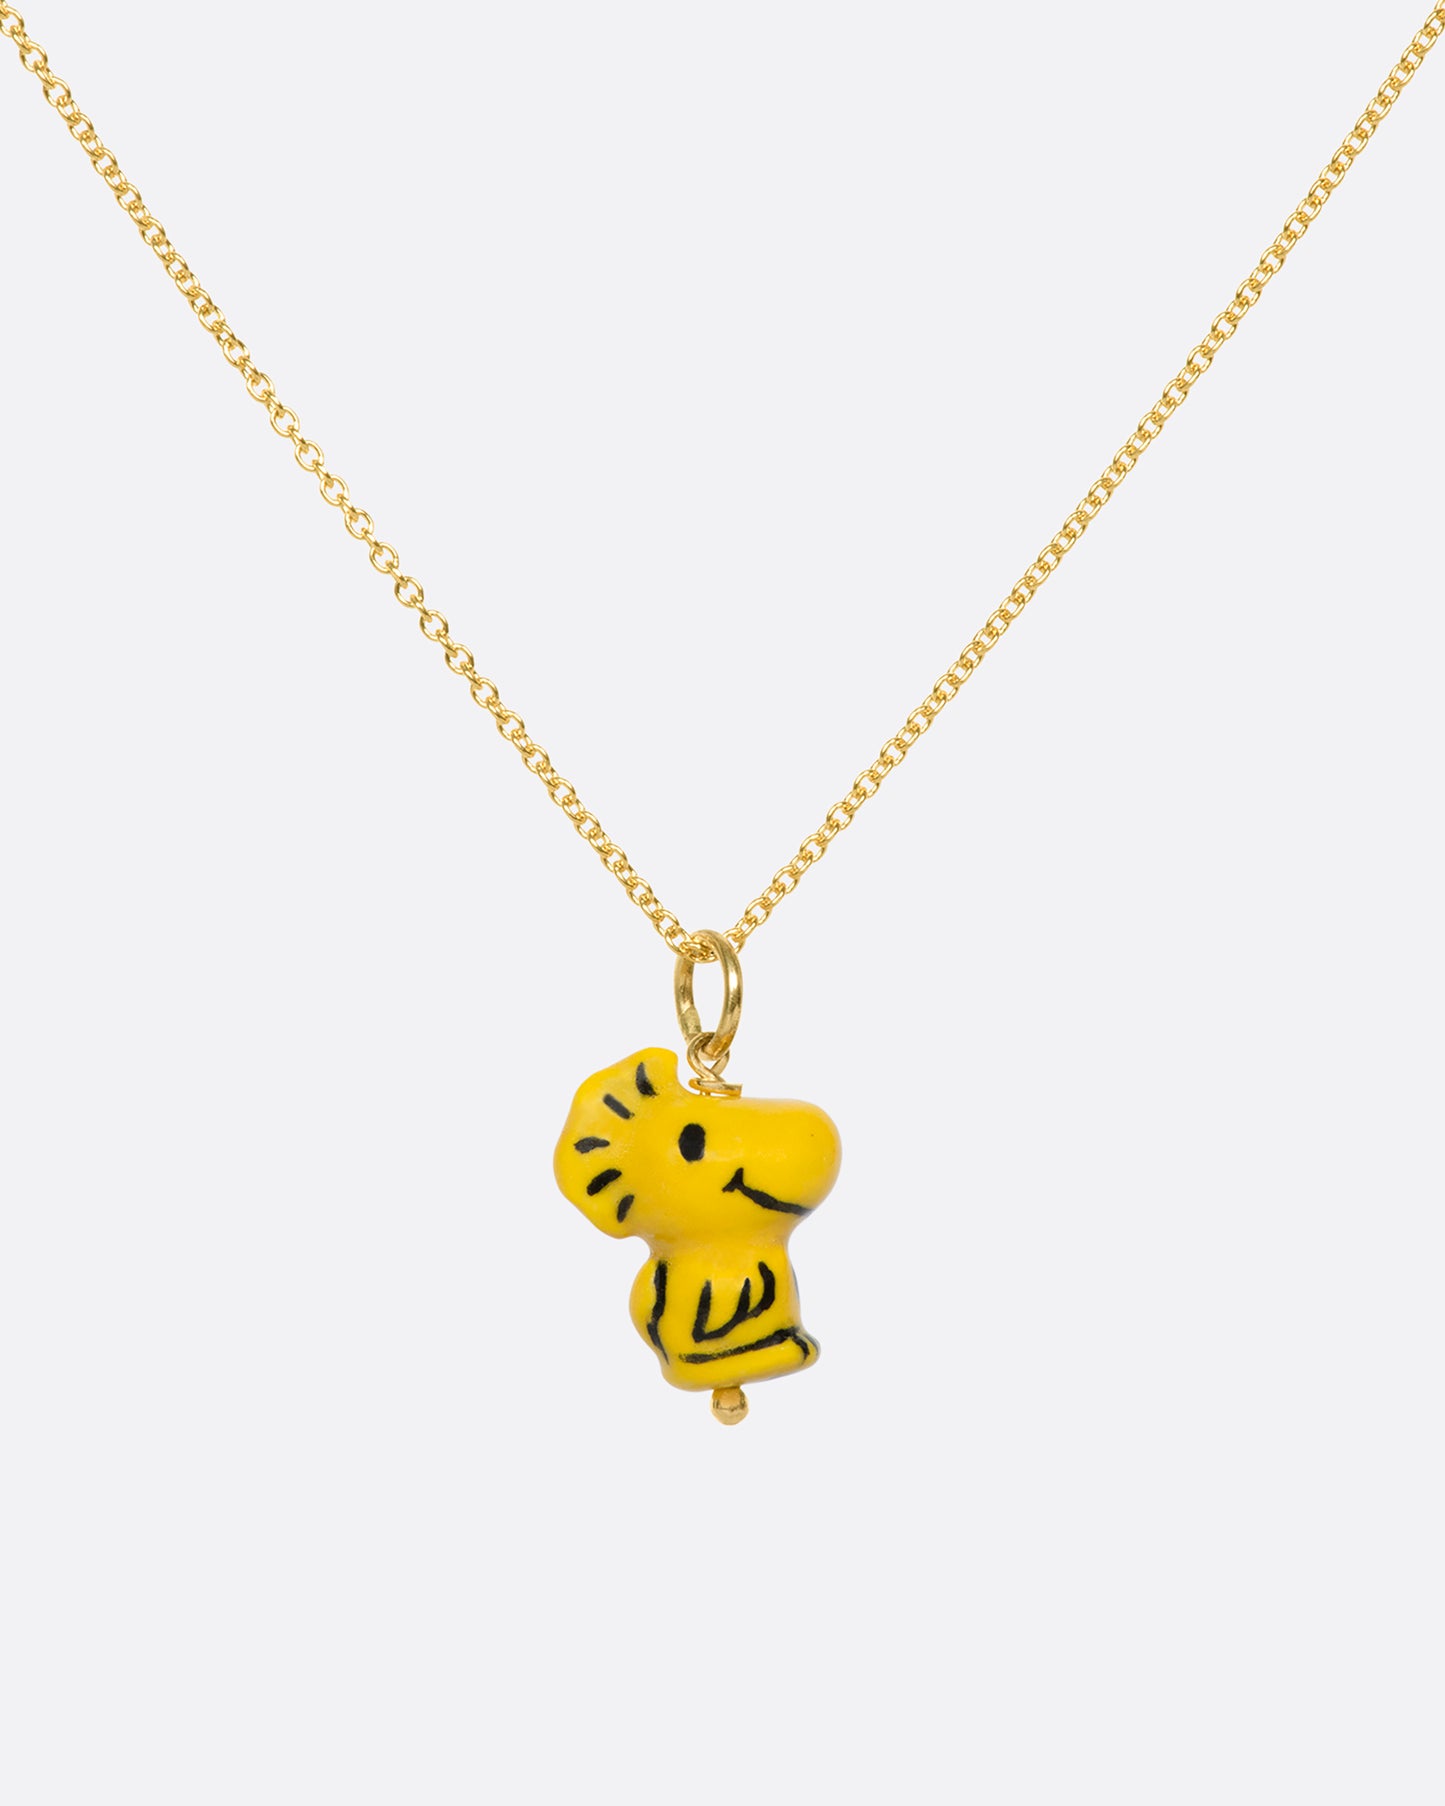 Peanuts lovers rejoice! Here we have a little Woodstock that can fly in circles around your head or just hang from your charm bracelet.